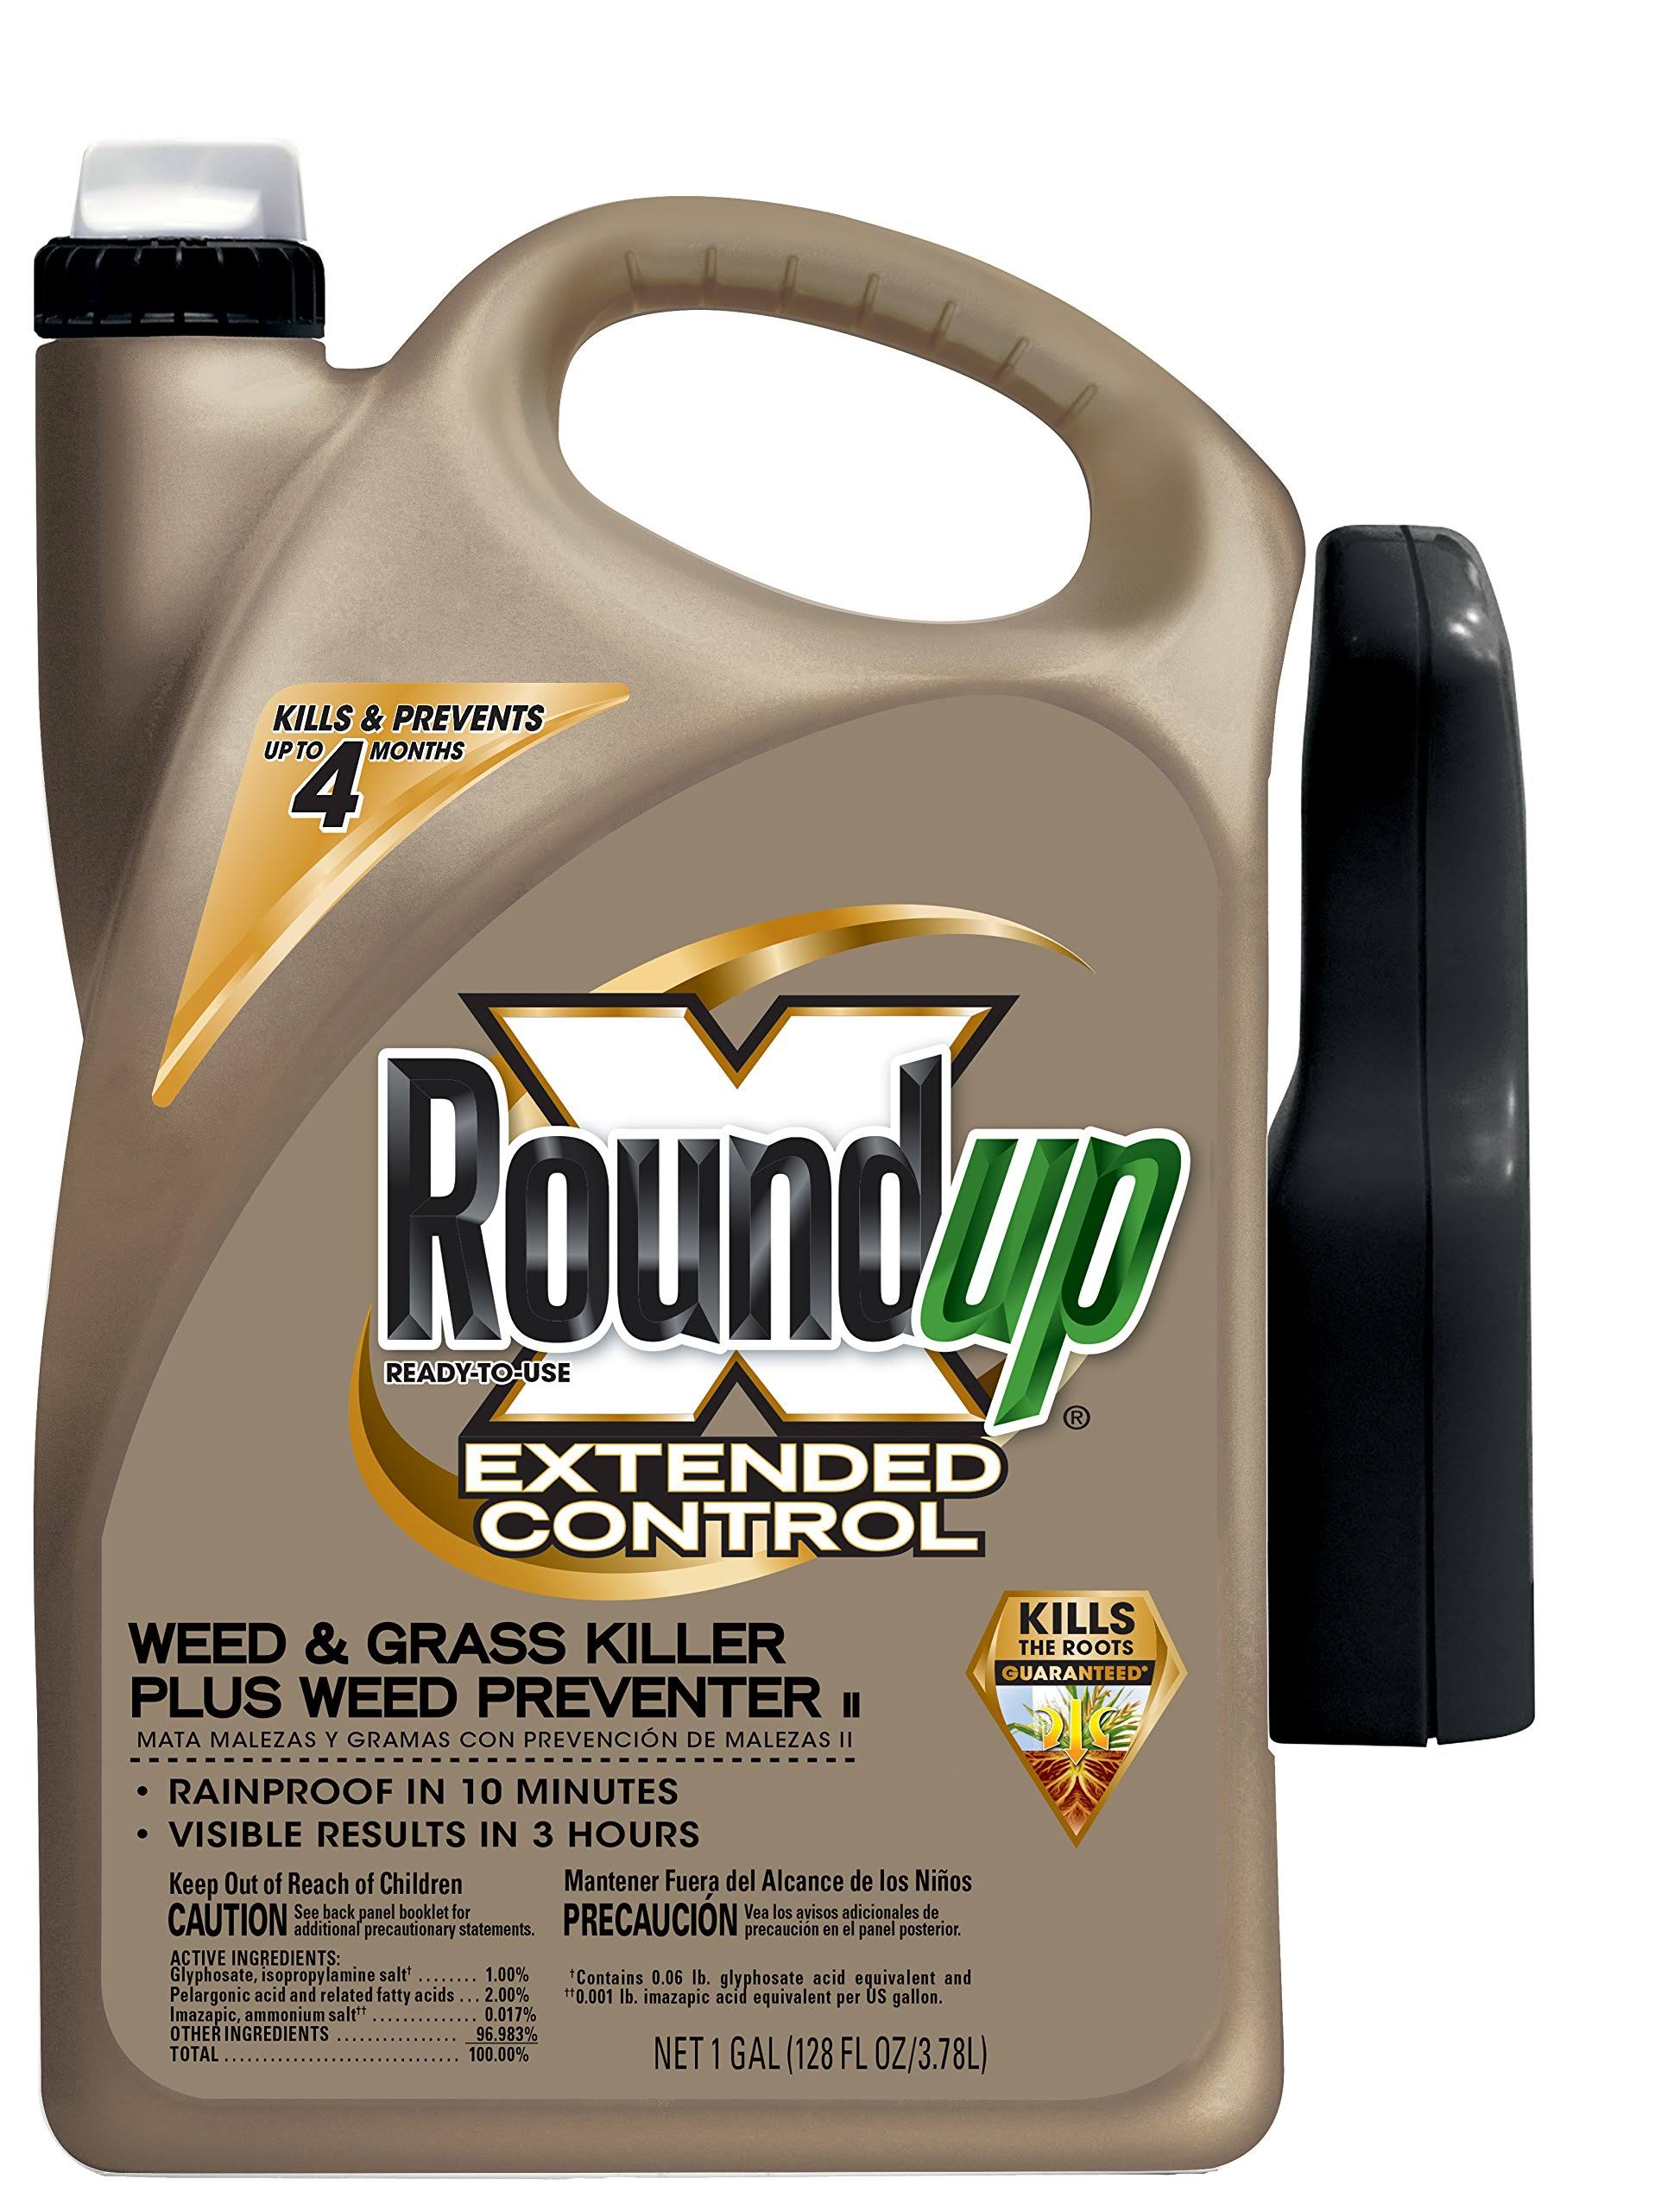 Scotts Ortho Roundup Extended Control Weed and Grass Killer - 1 Gallon